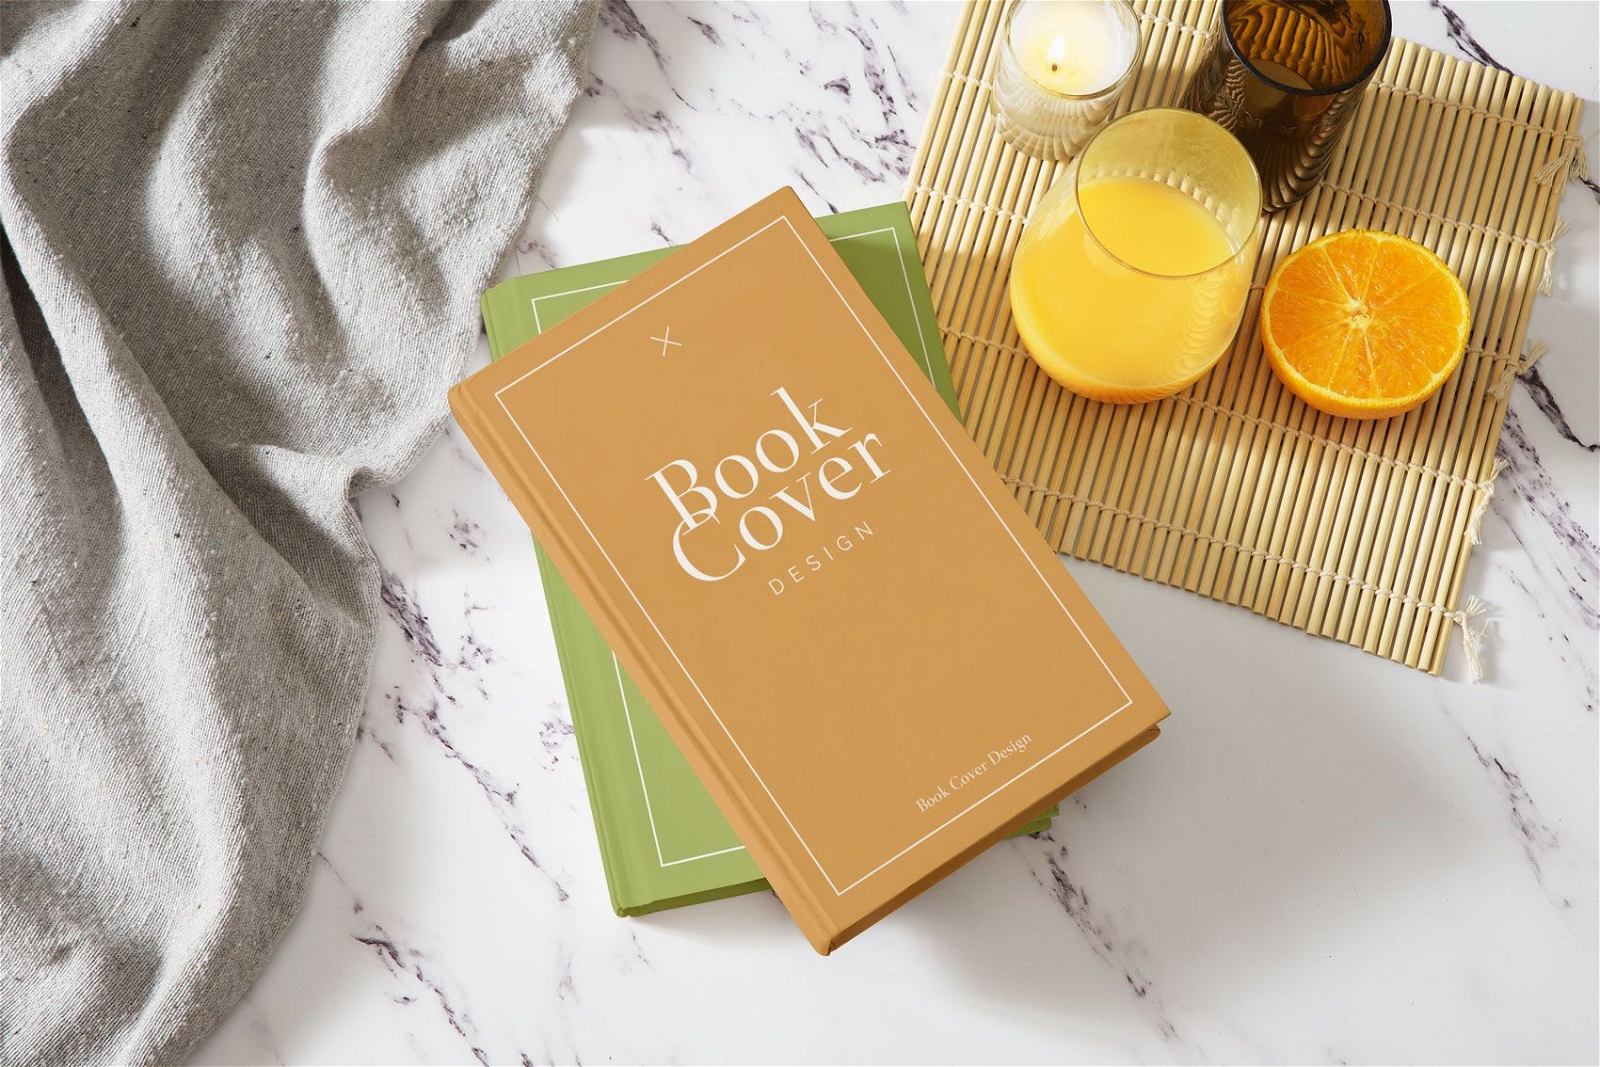 Breakfast book cover mockup composition